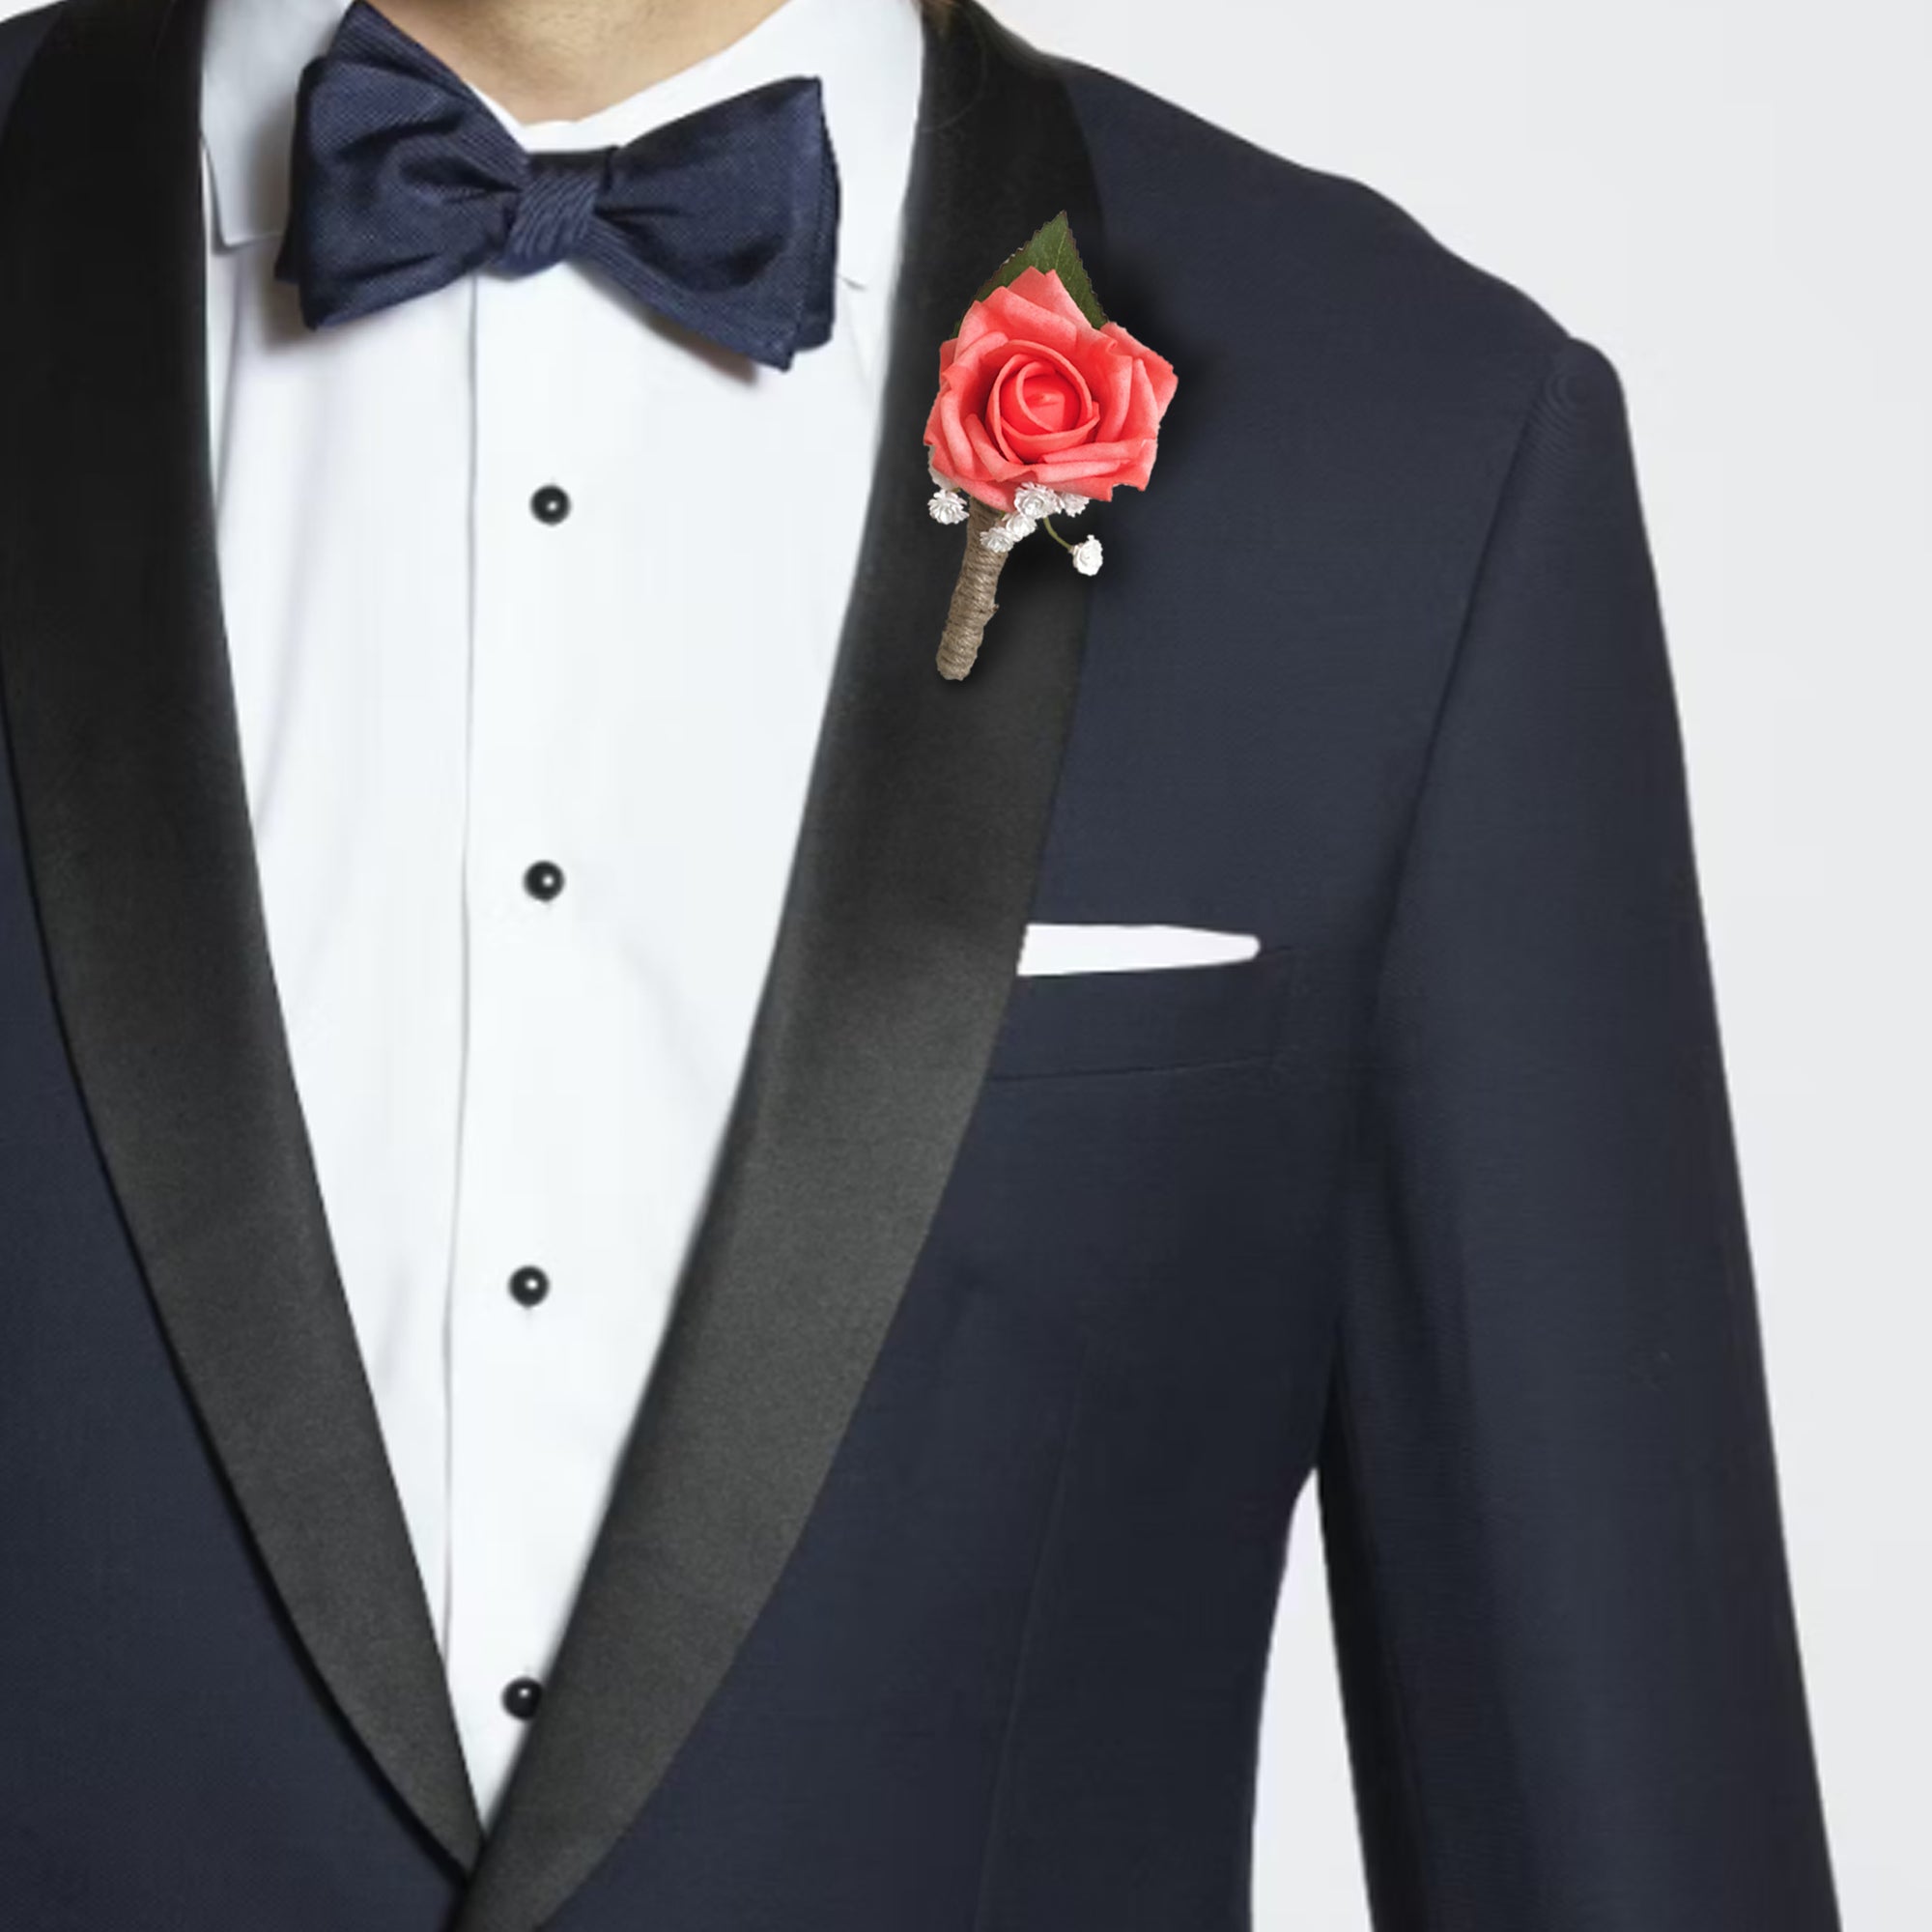 Coral Grooms Boutonniere and Corsage Prom Boutineer